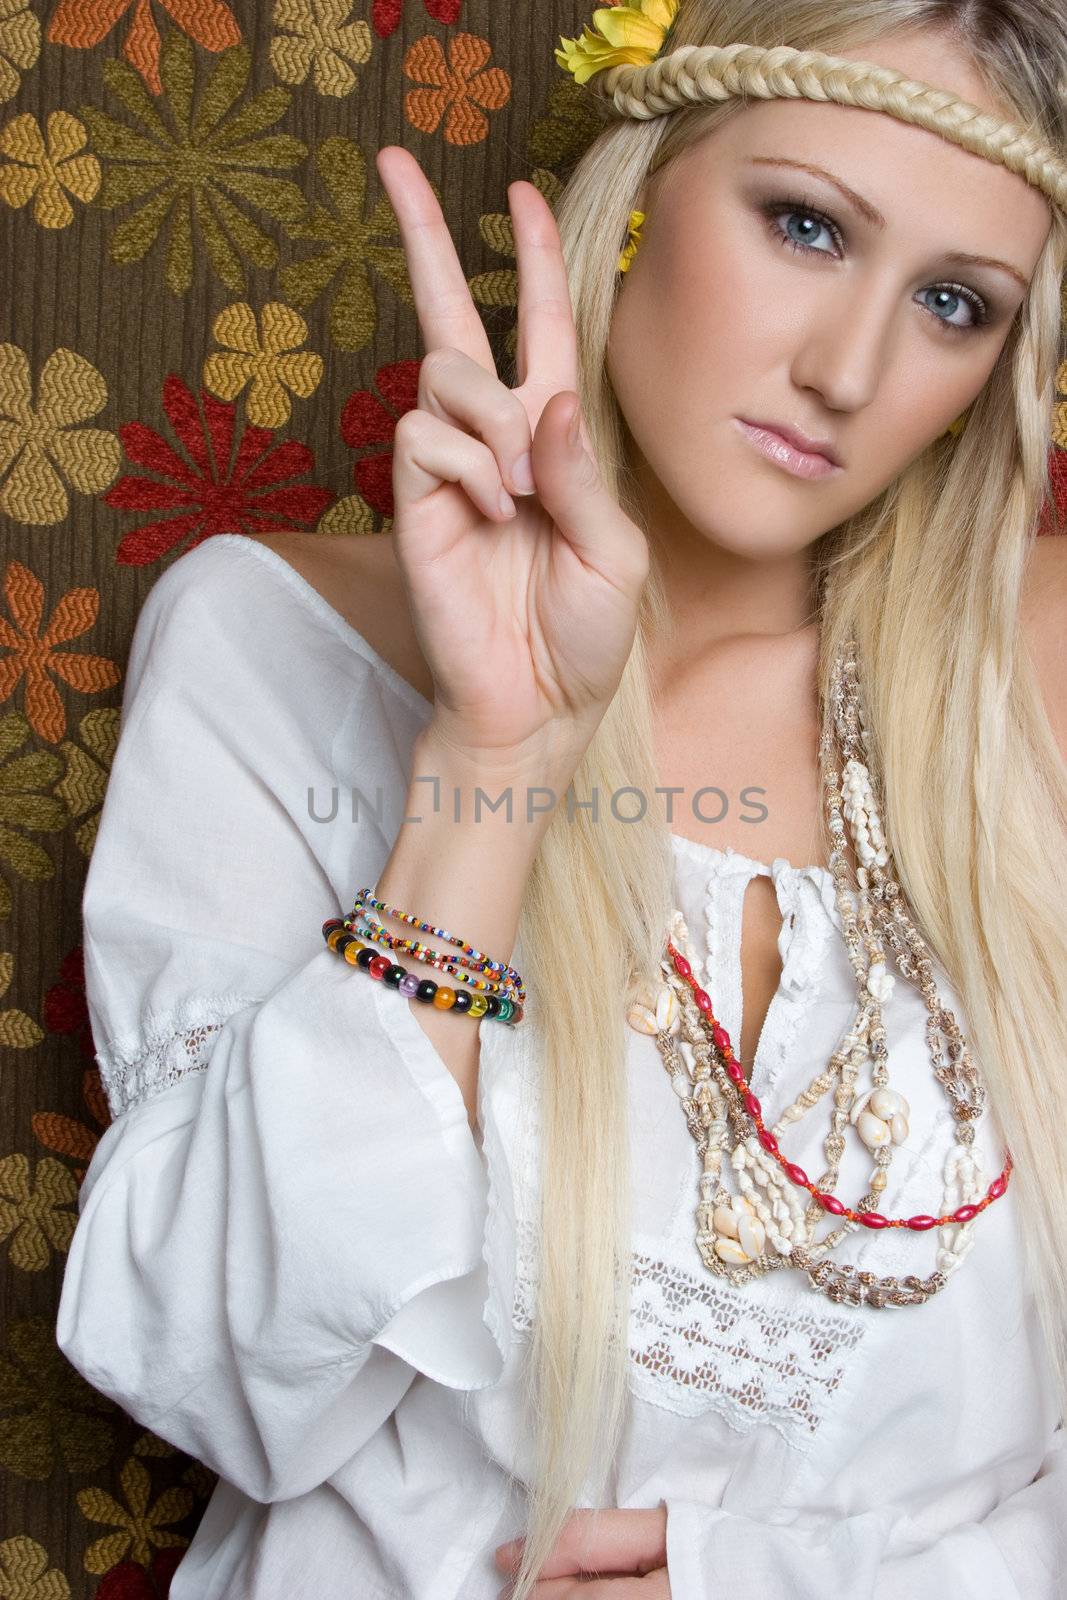 Hippie girl showing peace sign